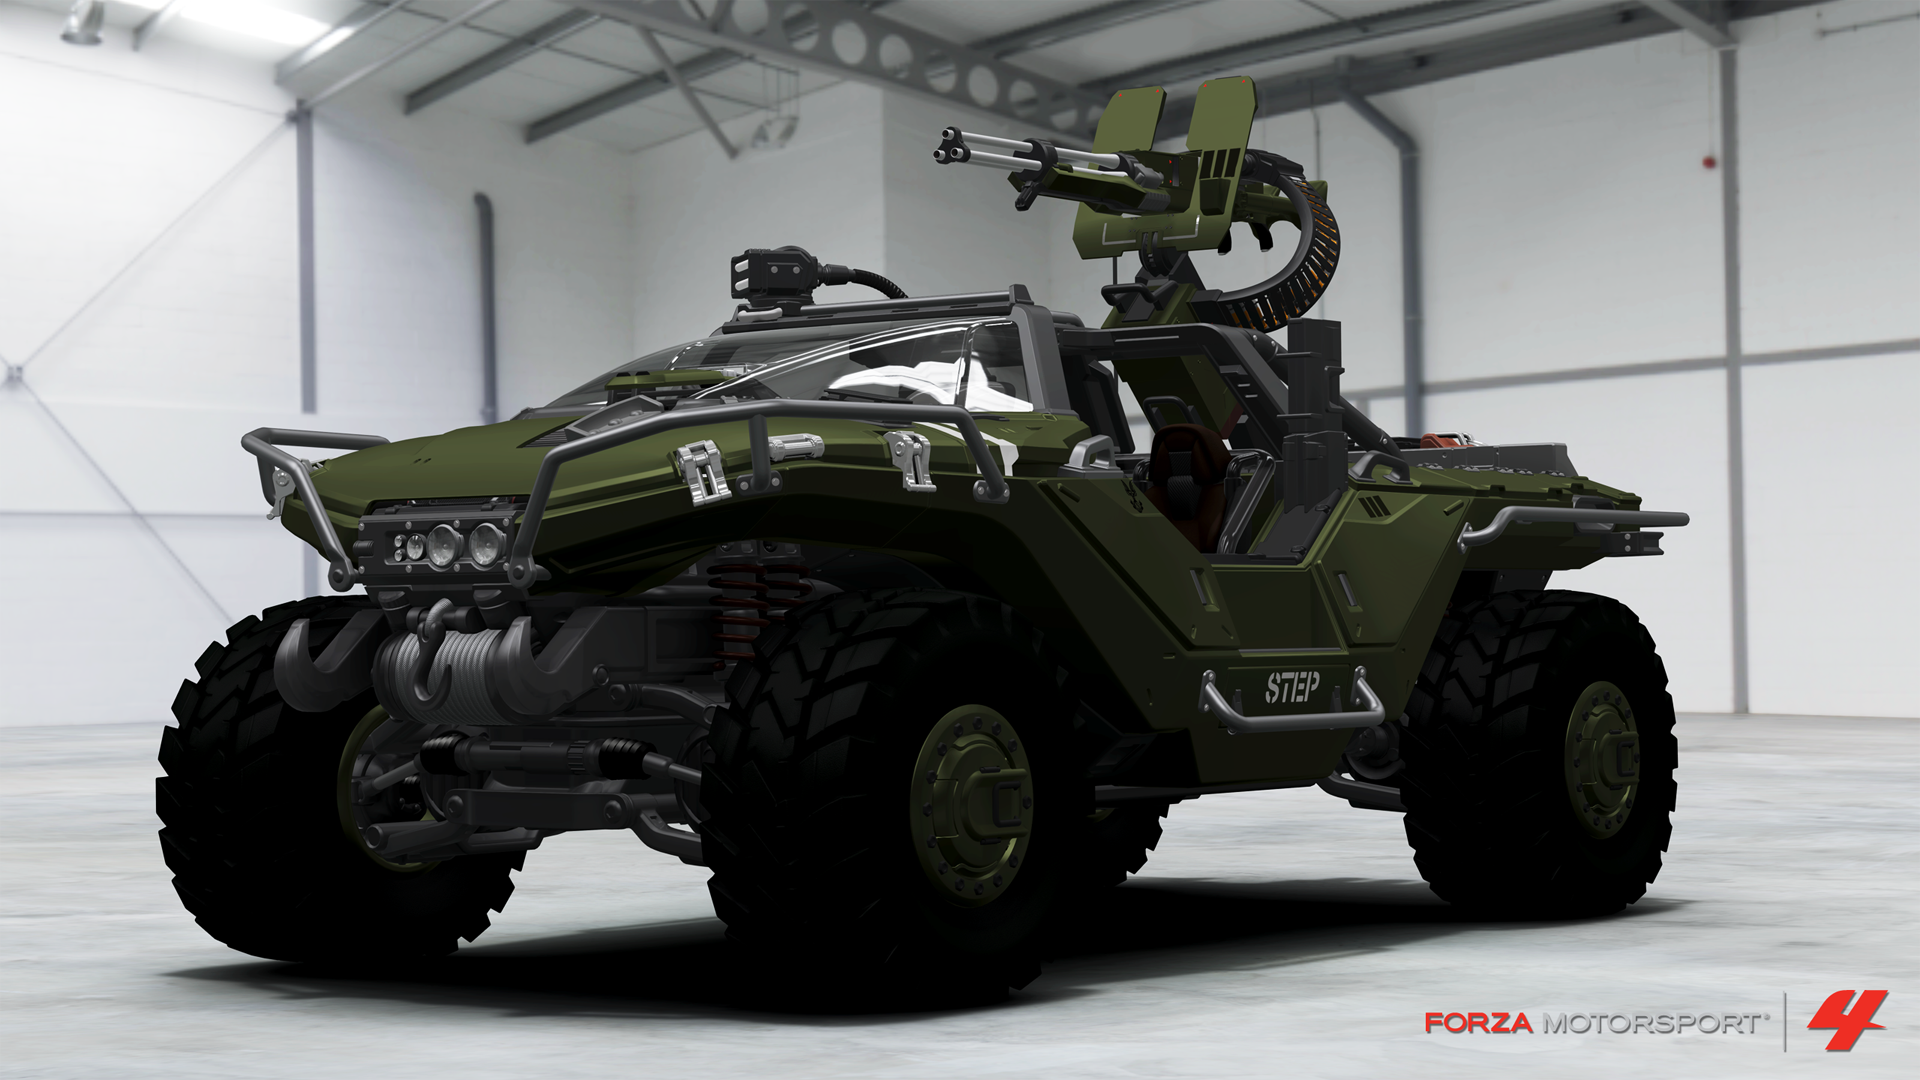 General 1920x1080 Forza Motorsport 4 car video games Halo (game) Warthog crossover vehicle UNSC Turn 10 Studios